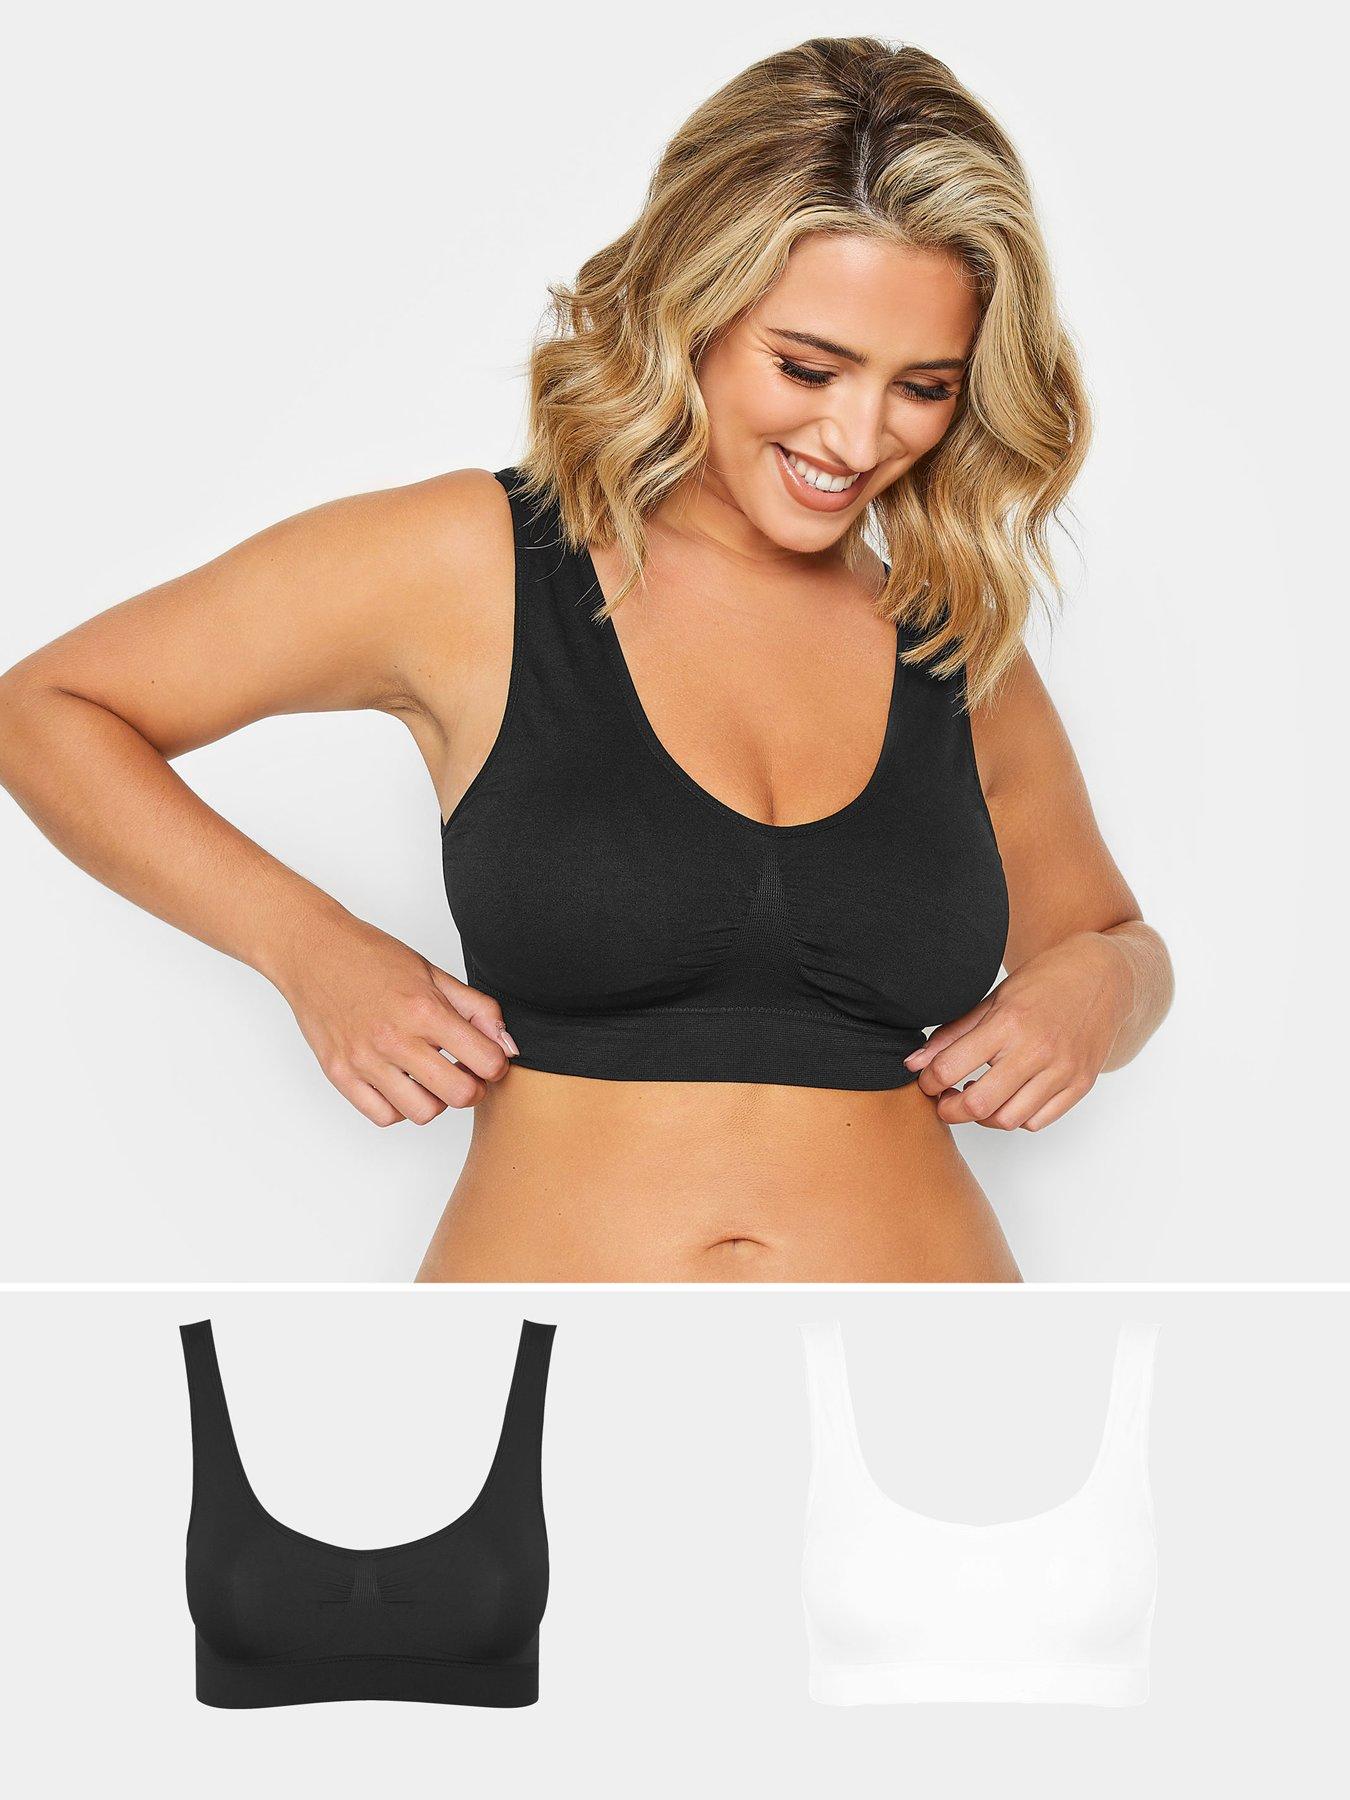 Lucky brand 2pk seamless comfort lounge active sports bras plus size 2X  new!!!